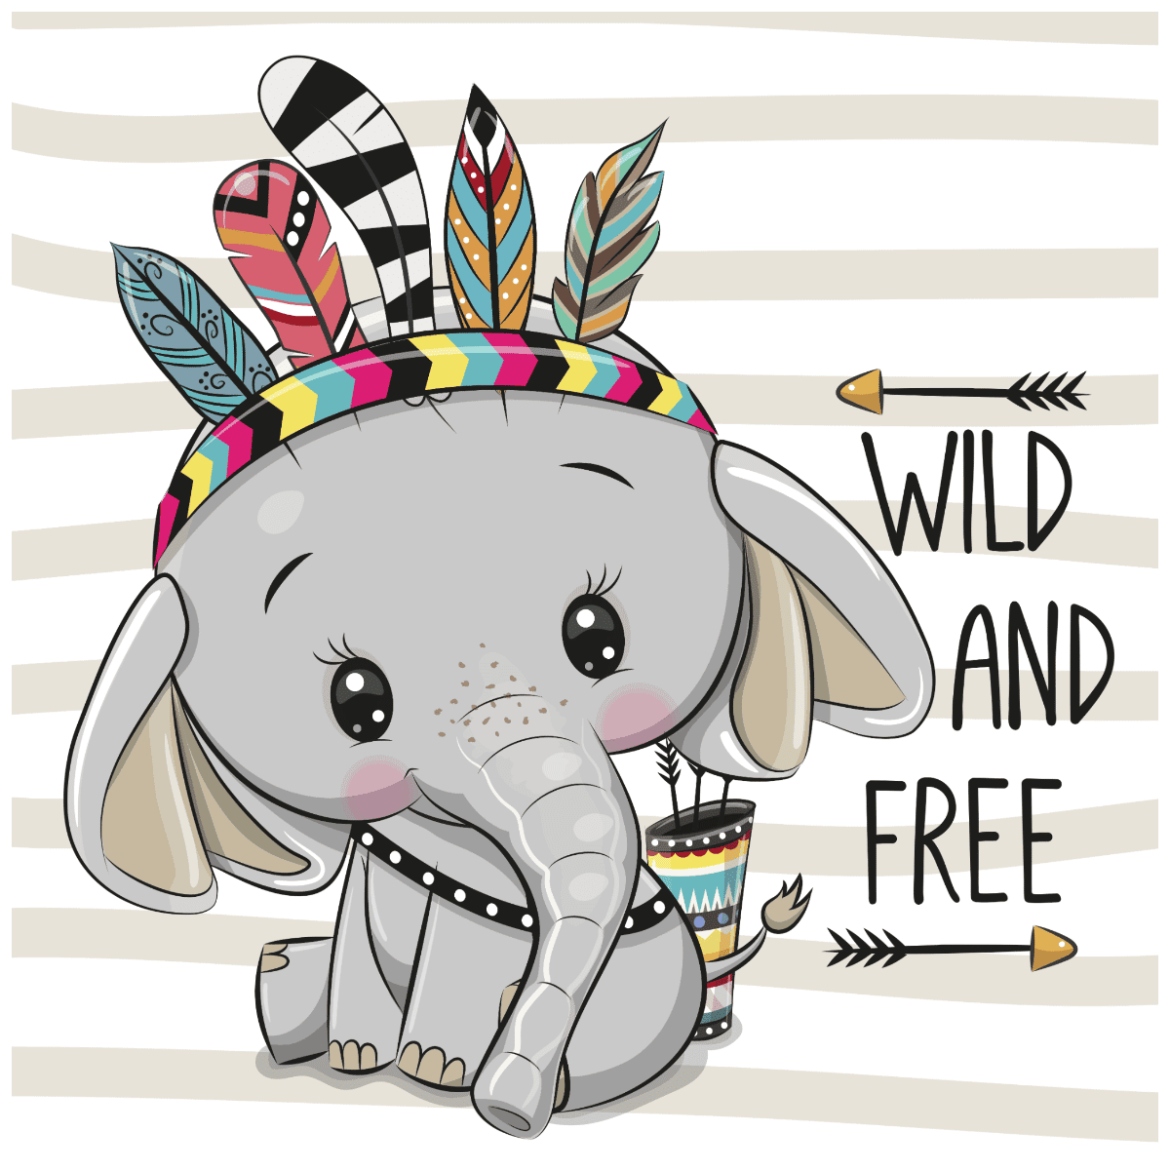 Inspiring Quotes About Living Wild and Free